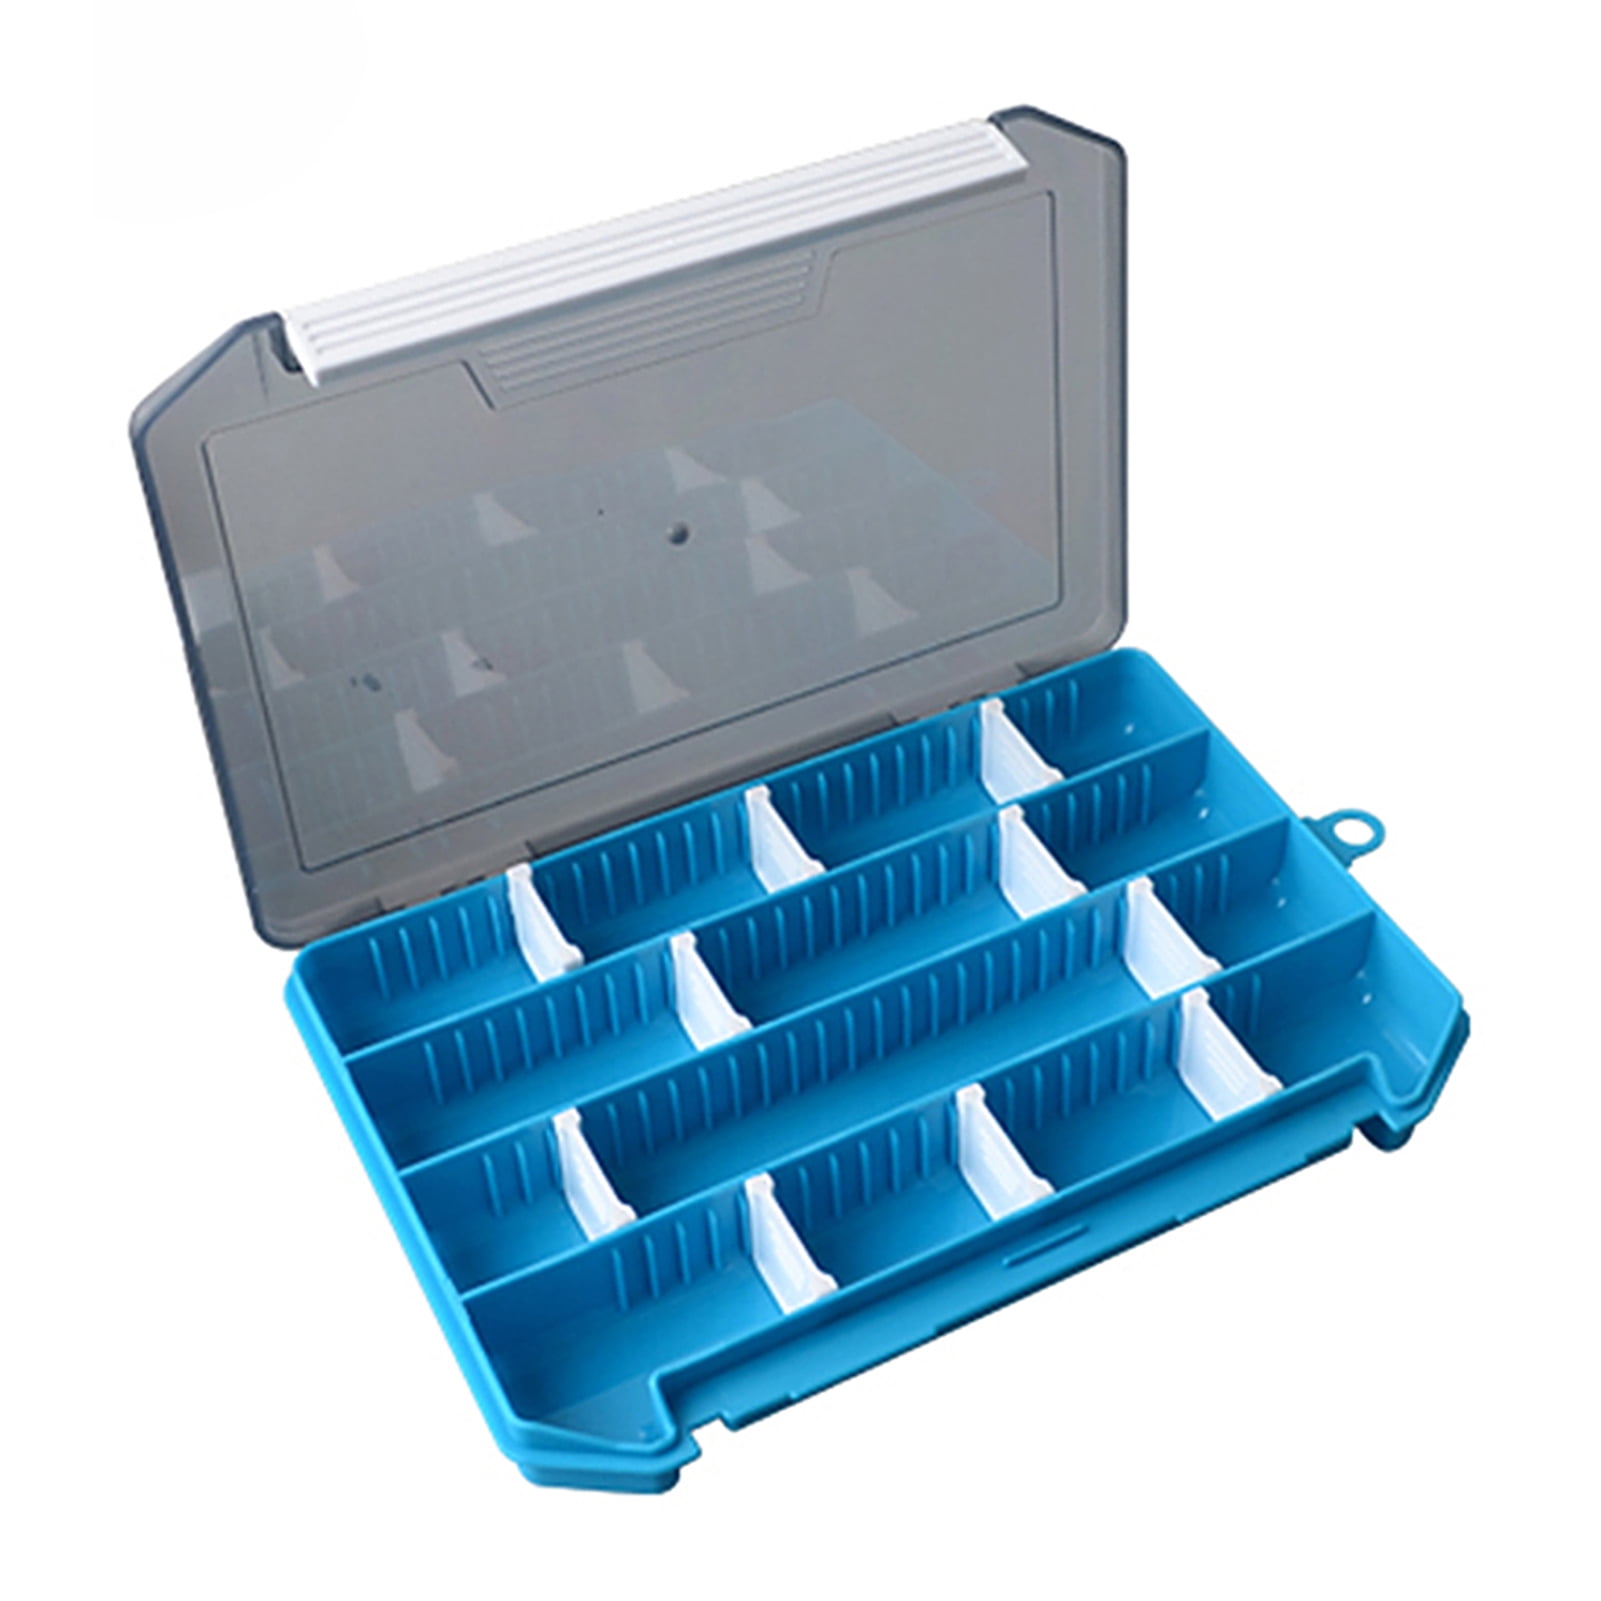 Ruiboury Organize Fishing Accessories With 3-Layer Plastic Storage